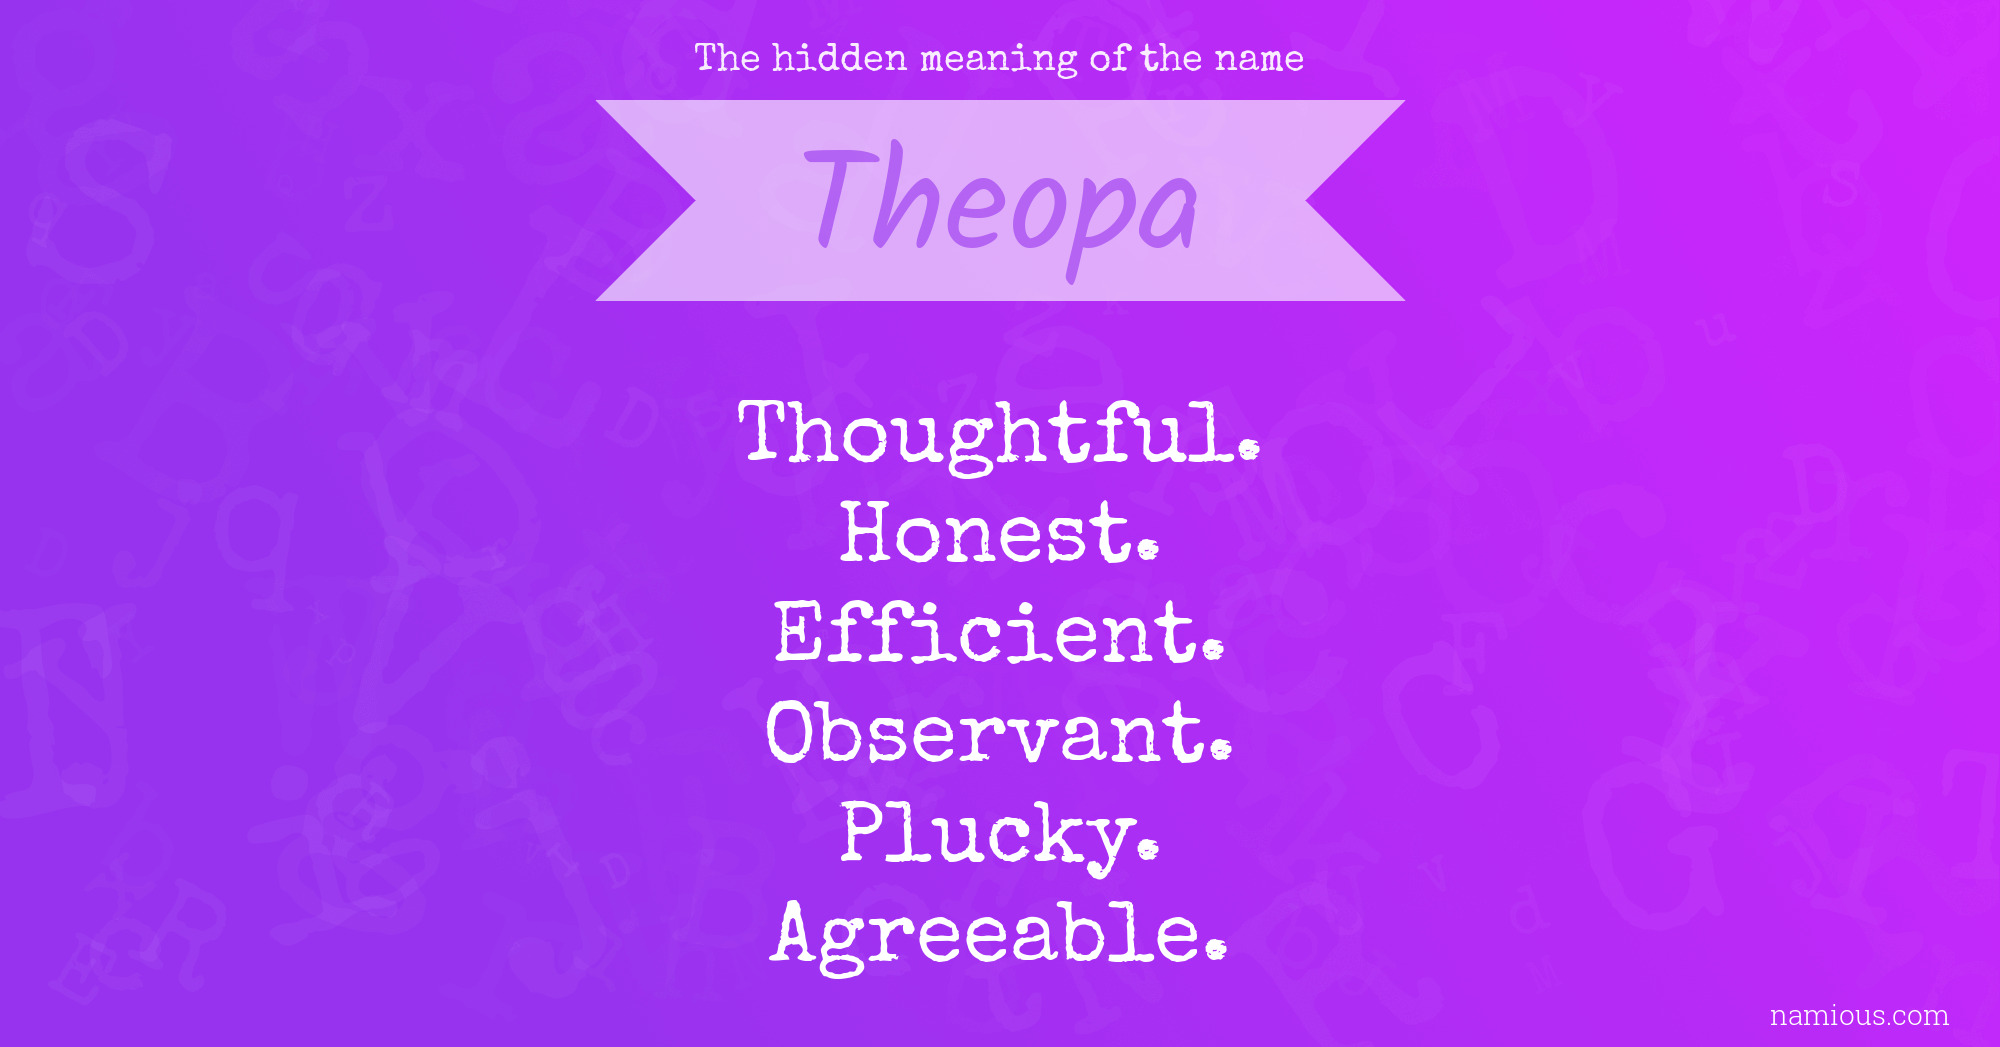 The hidden meaning of the name Theopa